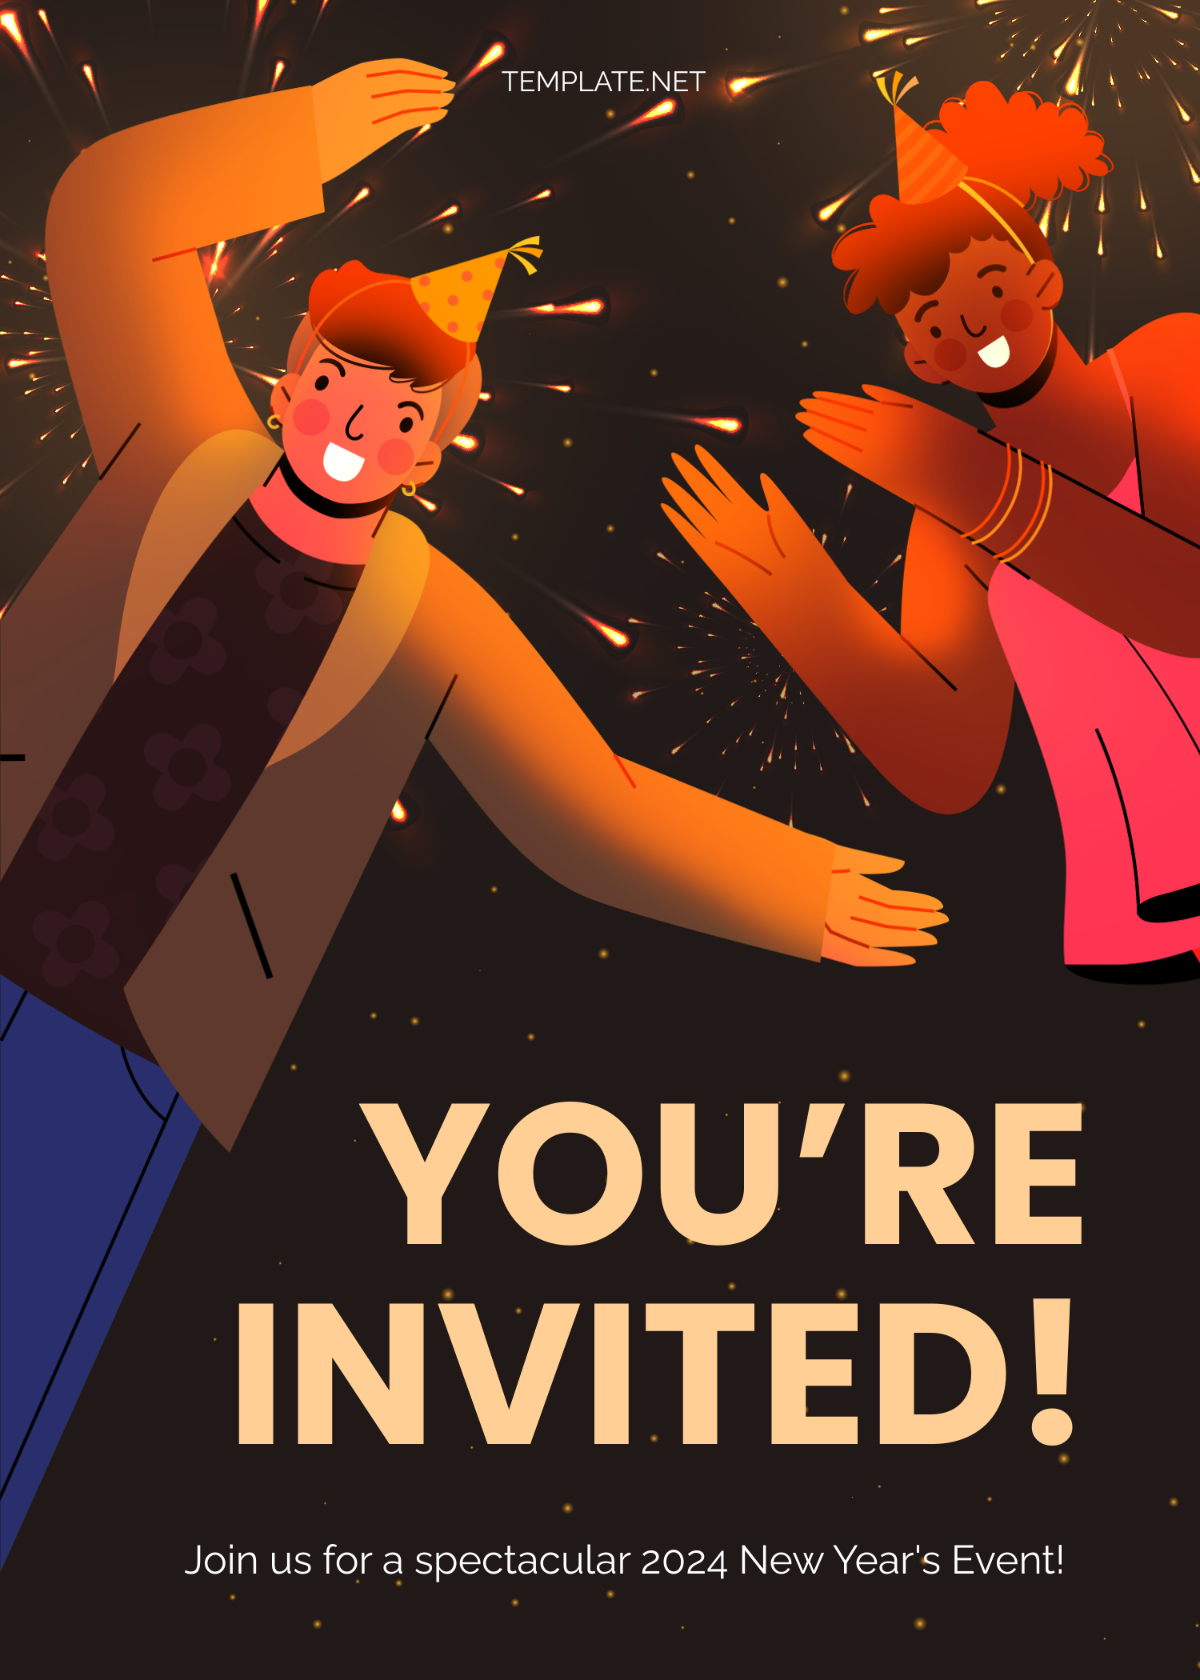 Free New Year Event Invitation Template